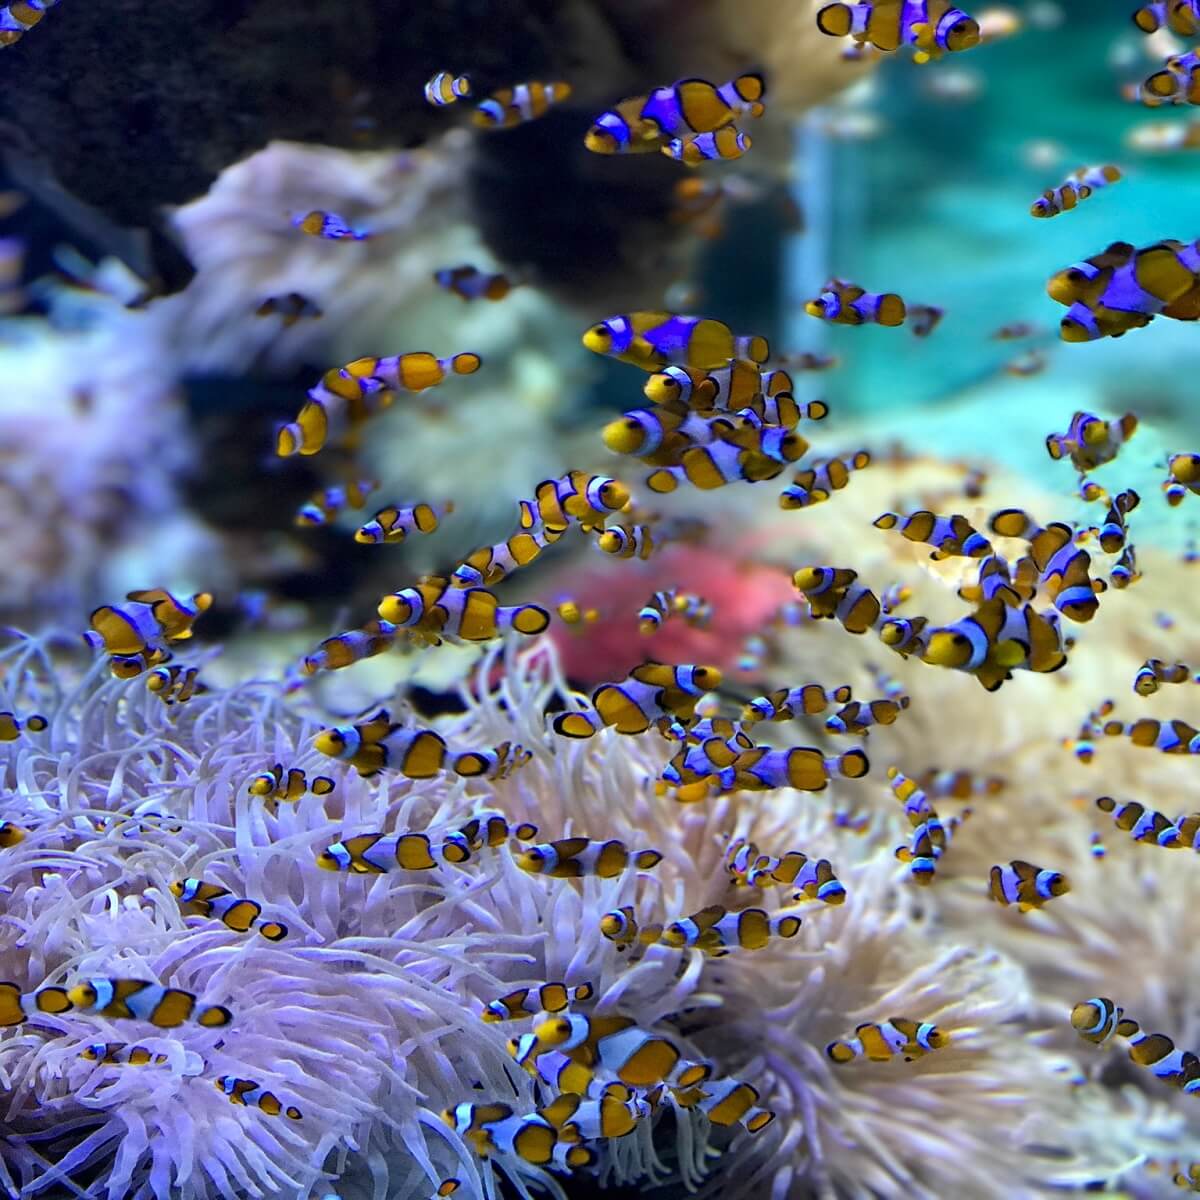 The Best Virtual Aquariums For Your Pc You Need To Check Out